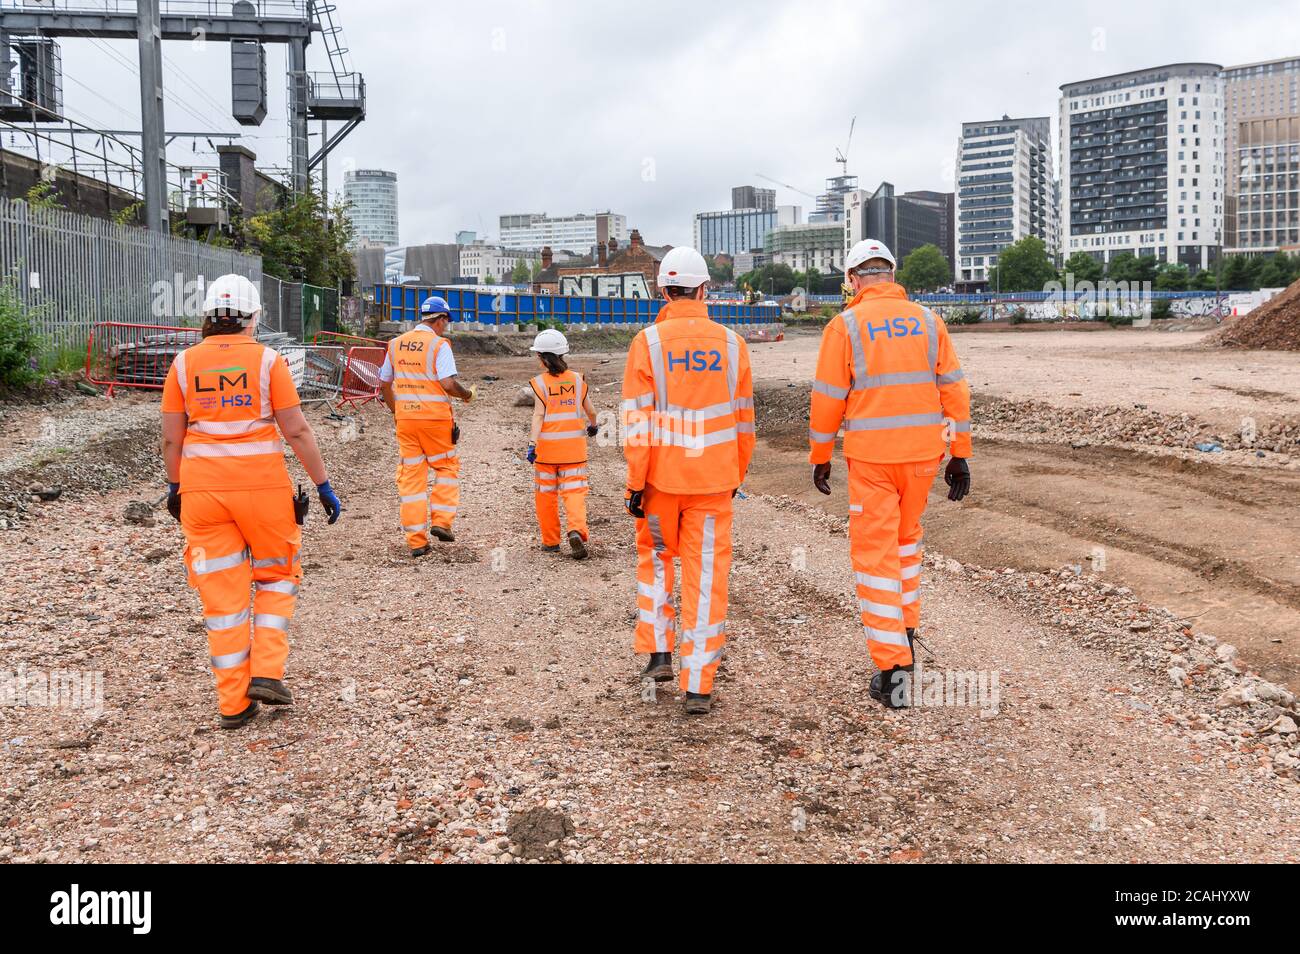 Workers on the site of the new HS2 railway station at Curzon Street in Birmingham, West Midlands, England, UK Stock Photo